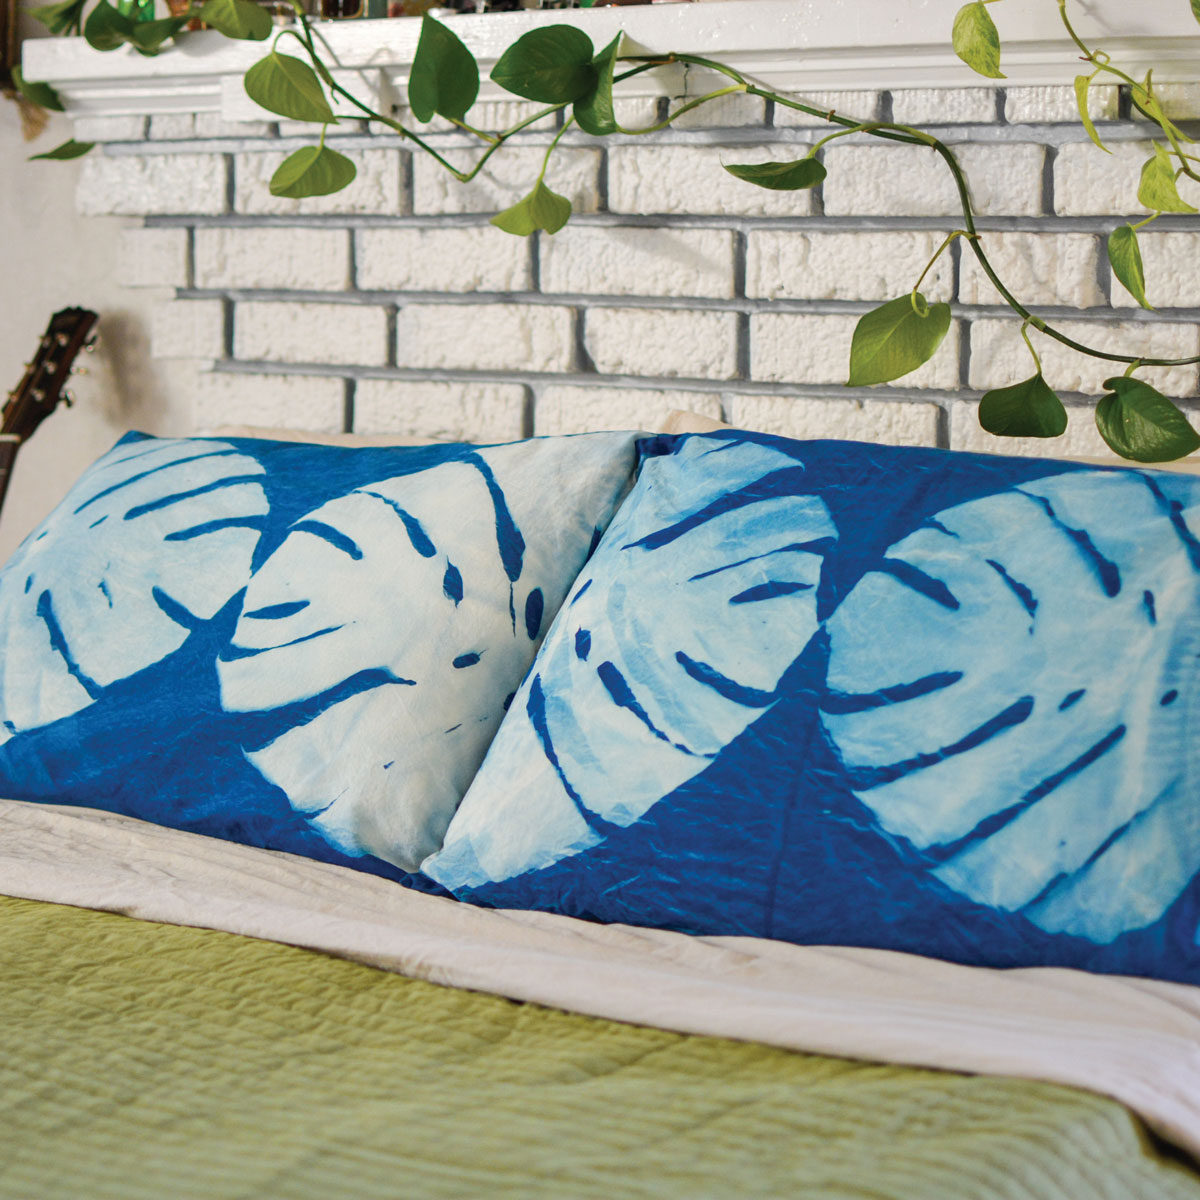 Cyanotype print of tropical leaves on two pillowcases placed on a bed